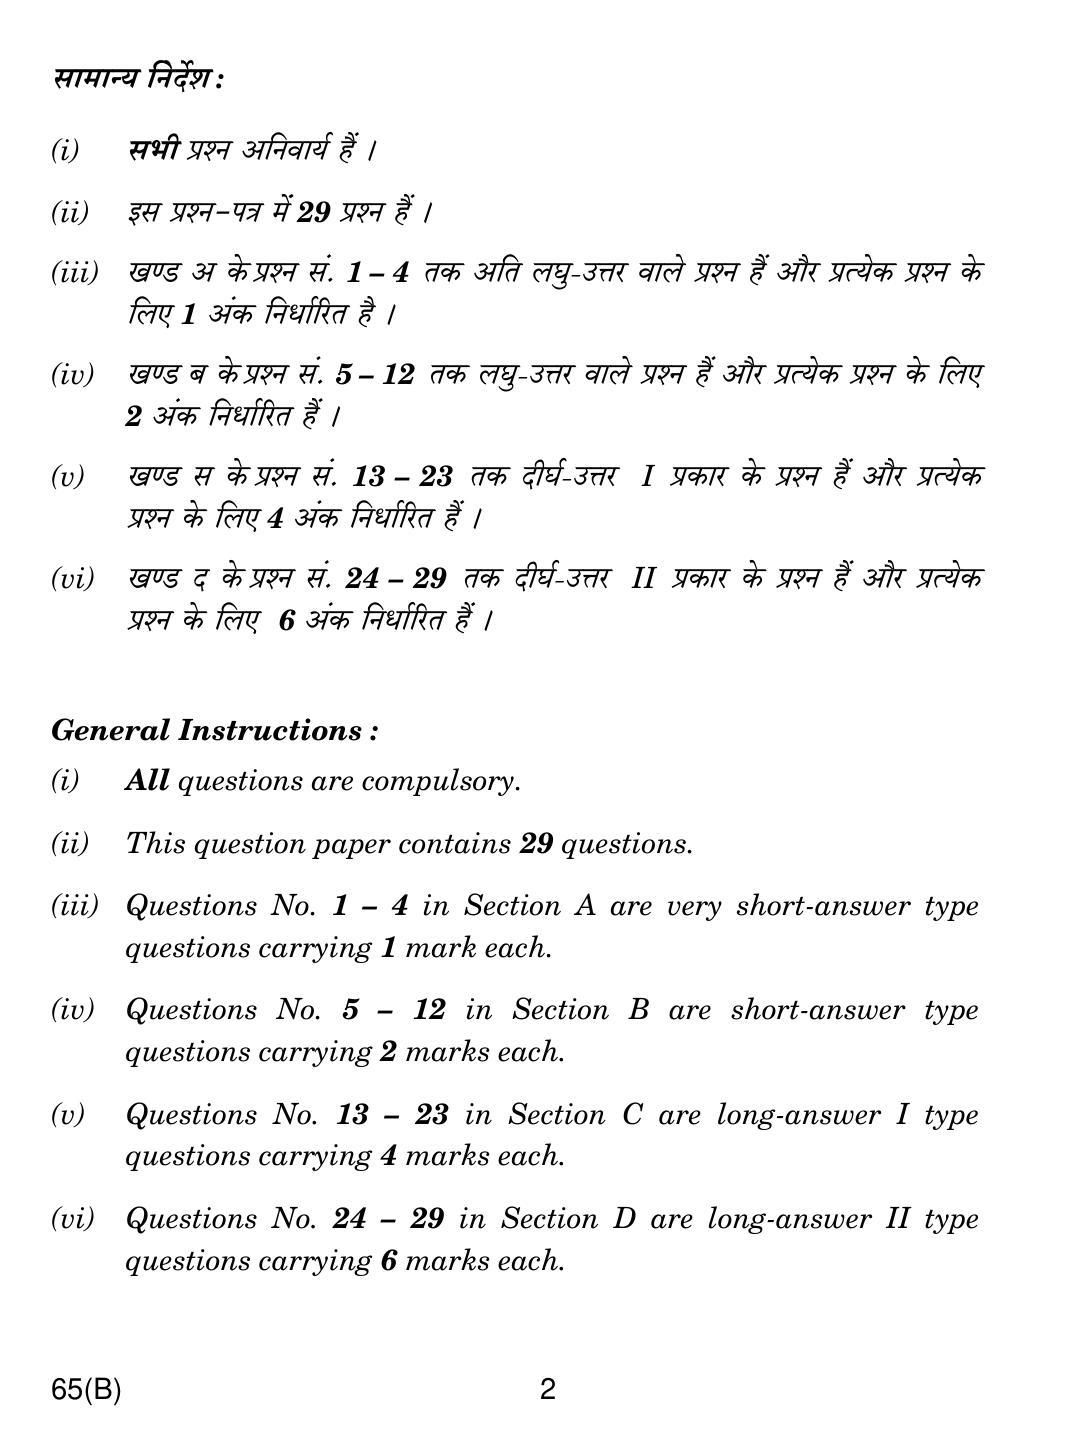 CBSE Class 12 65(B) MATHS FOR BLIND CANDIDATES 2018 Question Paper - Page 2